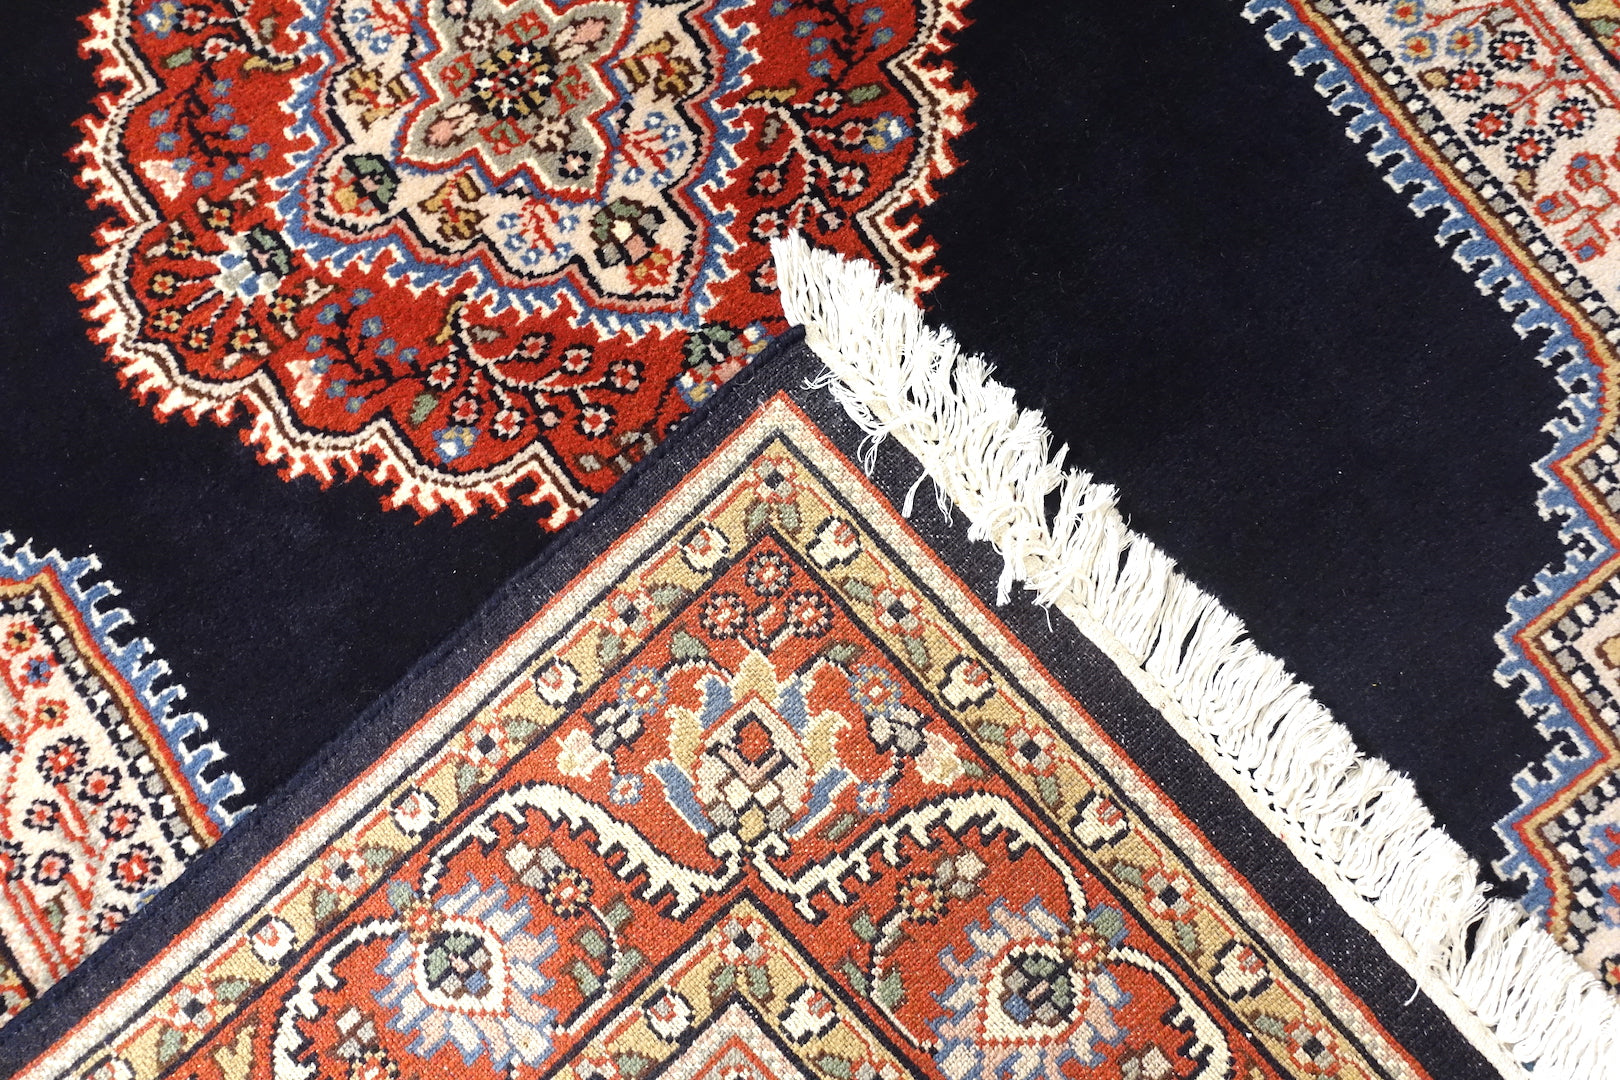 A 4 feet by 6 feet central Indian wool rug. The colours used are dark blue, beige,cream,red and brown.